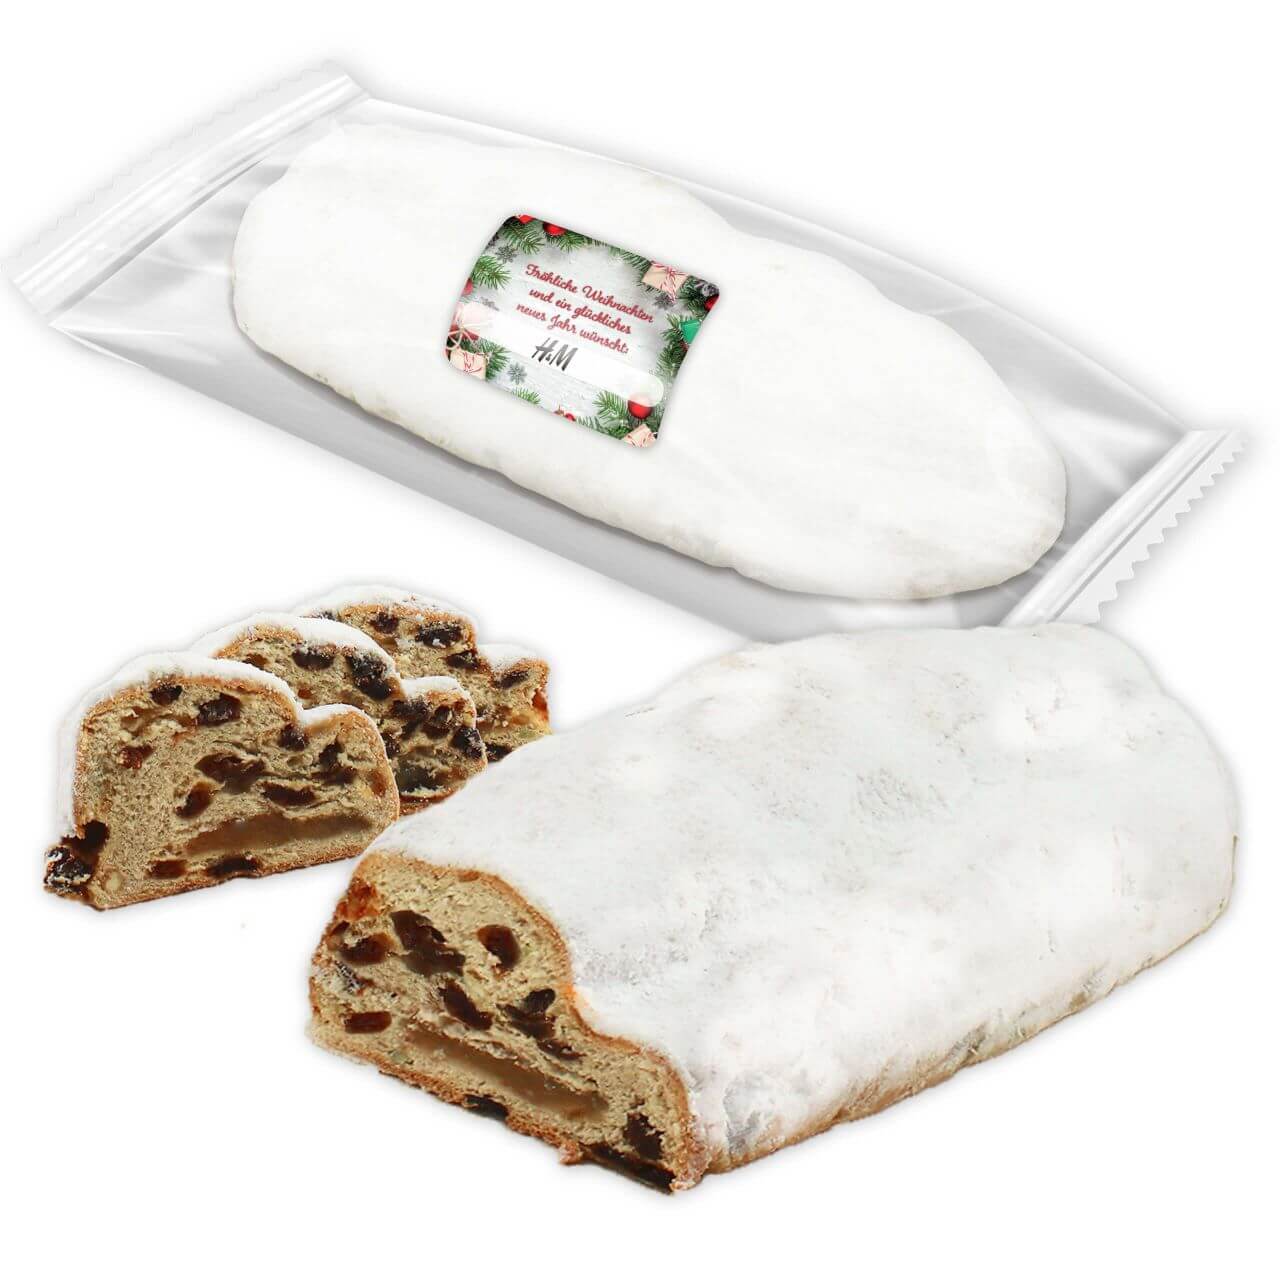 Christmas Stollen with printable Christmas sticker, 1000g | Gingerbread Market